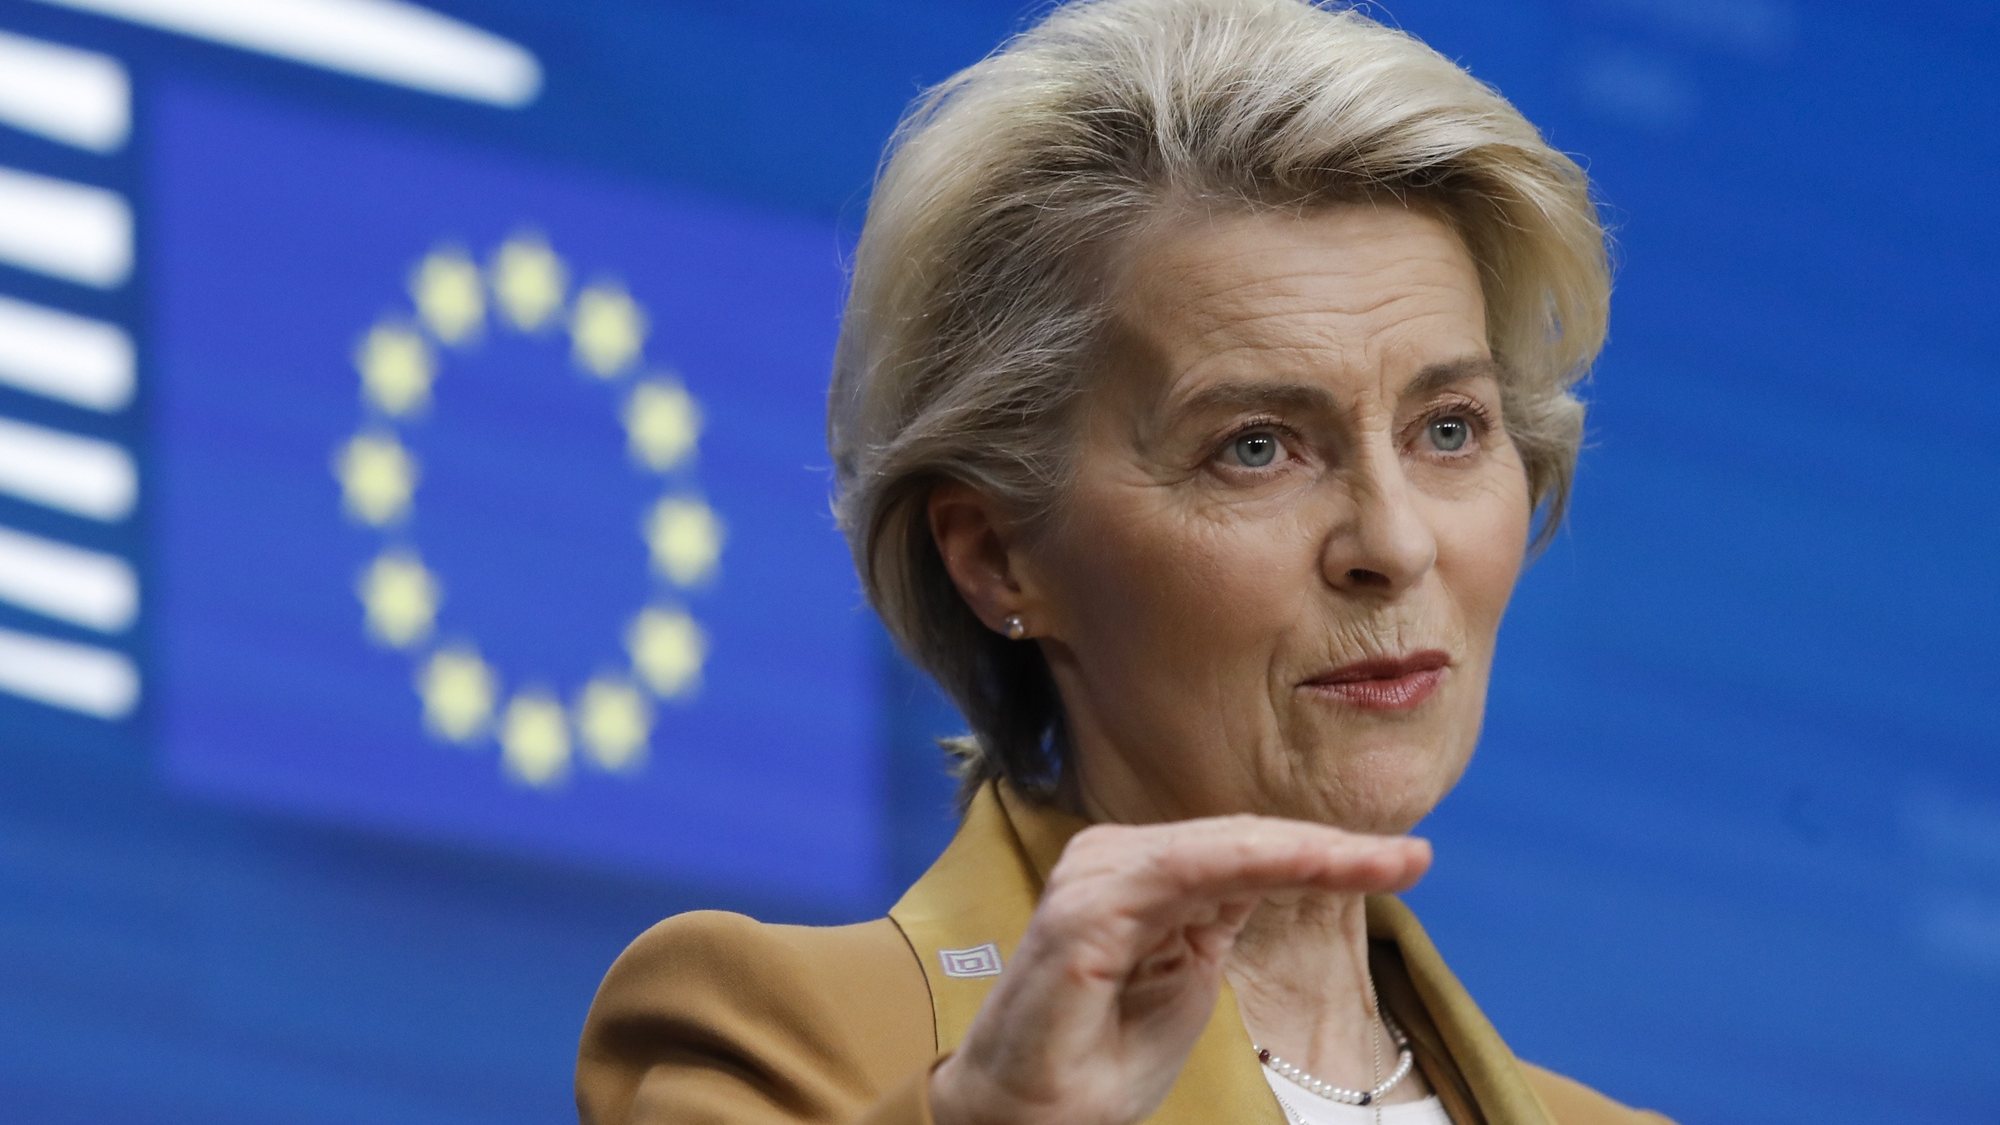 epa10539494 European Commission President Ursula von der Leyen gives a press briefing at the end of first day of  EU Summit in Brussels, Belgium, 23 March 2023. EU leaders meet for a two-day summit in Brussels to discuss the latest developments in relation to &#039;Russia&#039;s war of aggression against Ukraine&#039; and continued EU support for Ukraine and its people. The leaders will also debate on competitiveness, single market and the economy, energy, external relations among other topics, including migration.  EPA/OLIVIER HOSLET